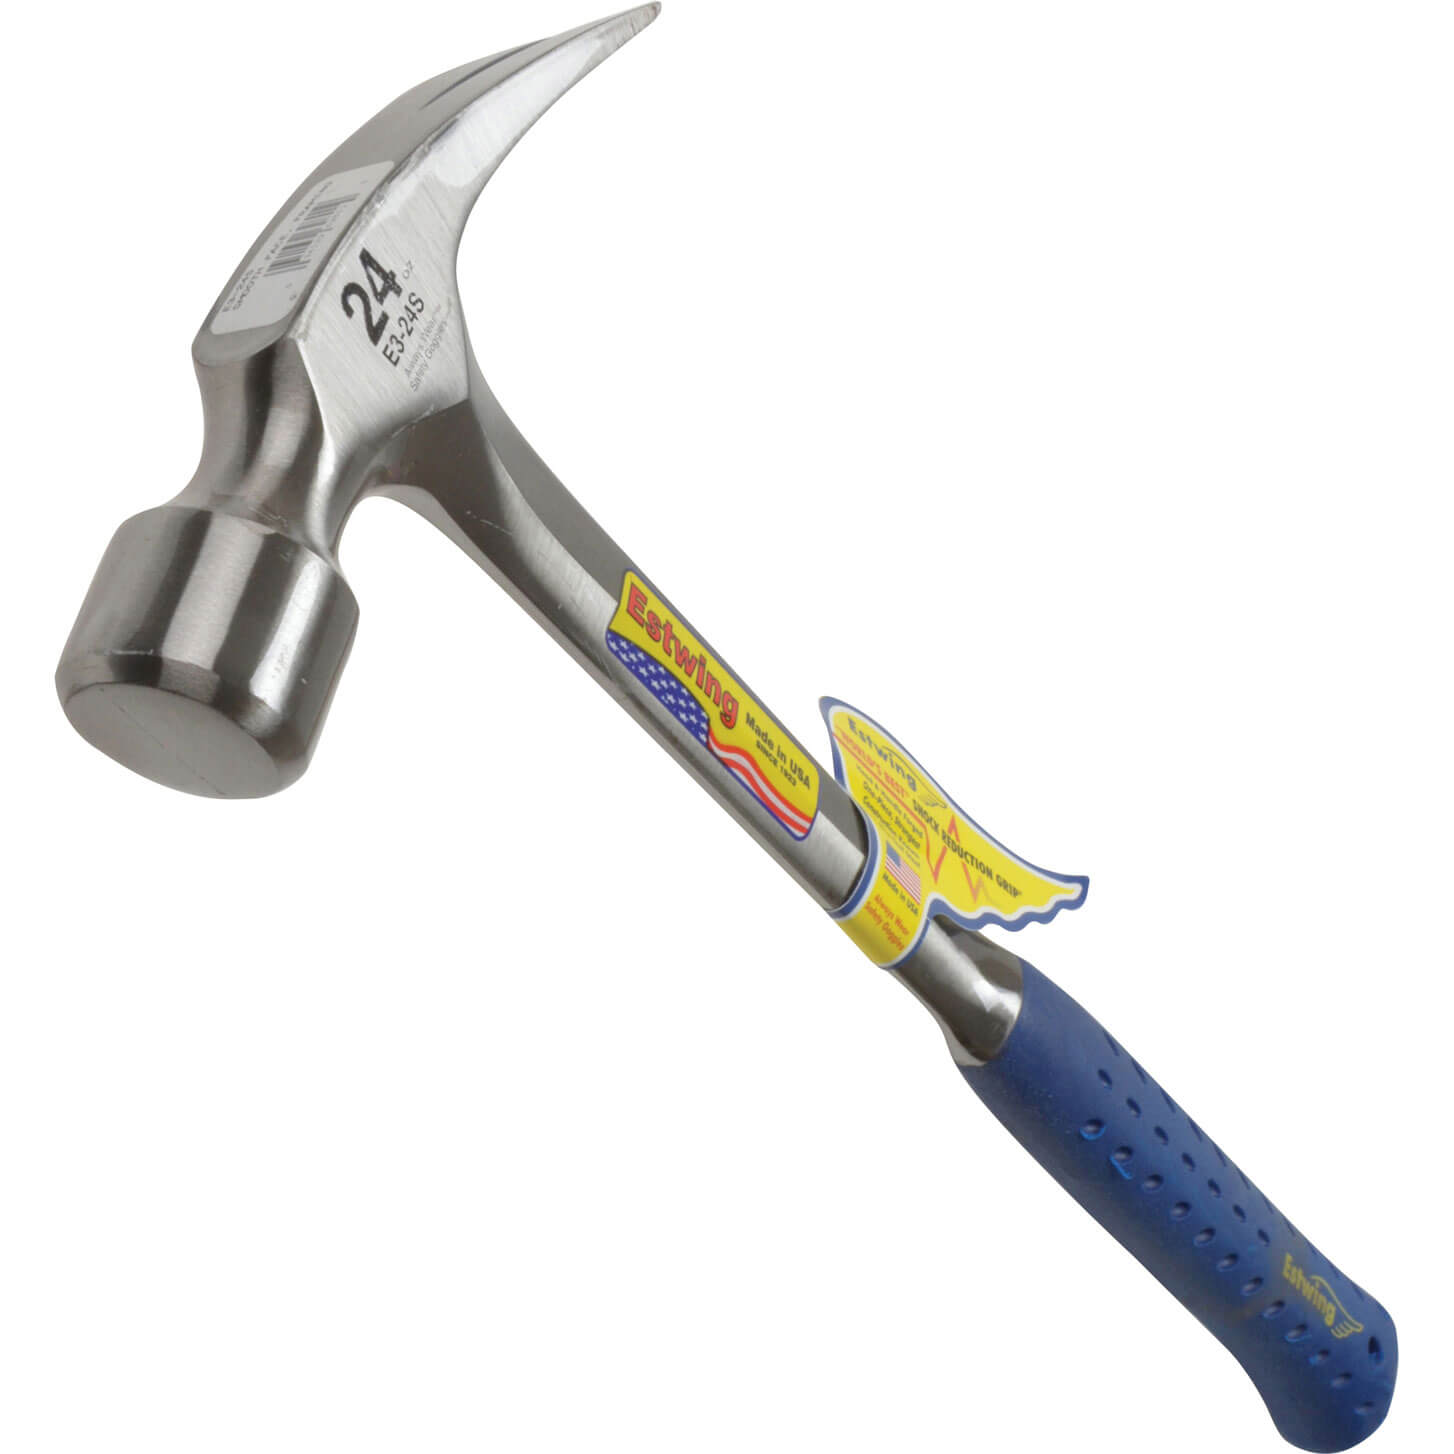 Estwing Straight Claw Framing Hammer 680g